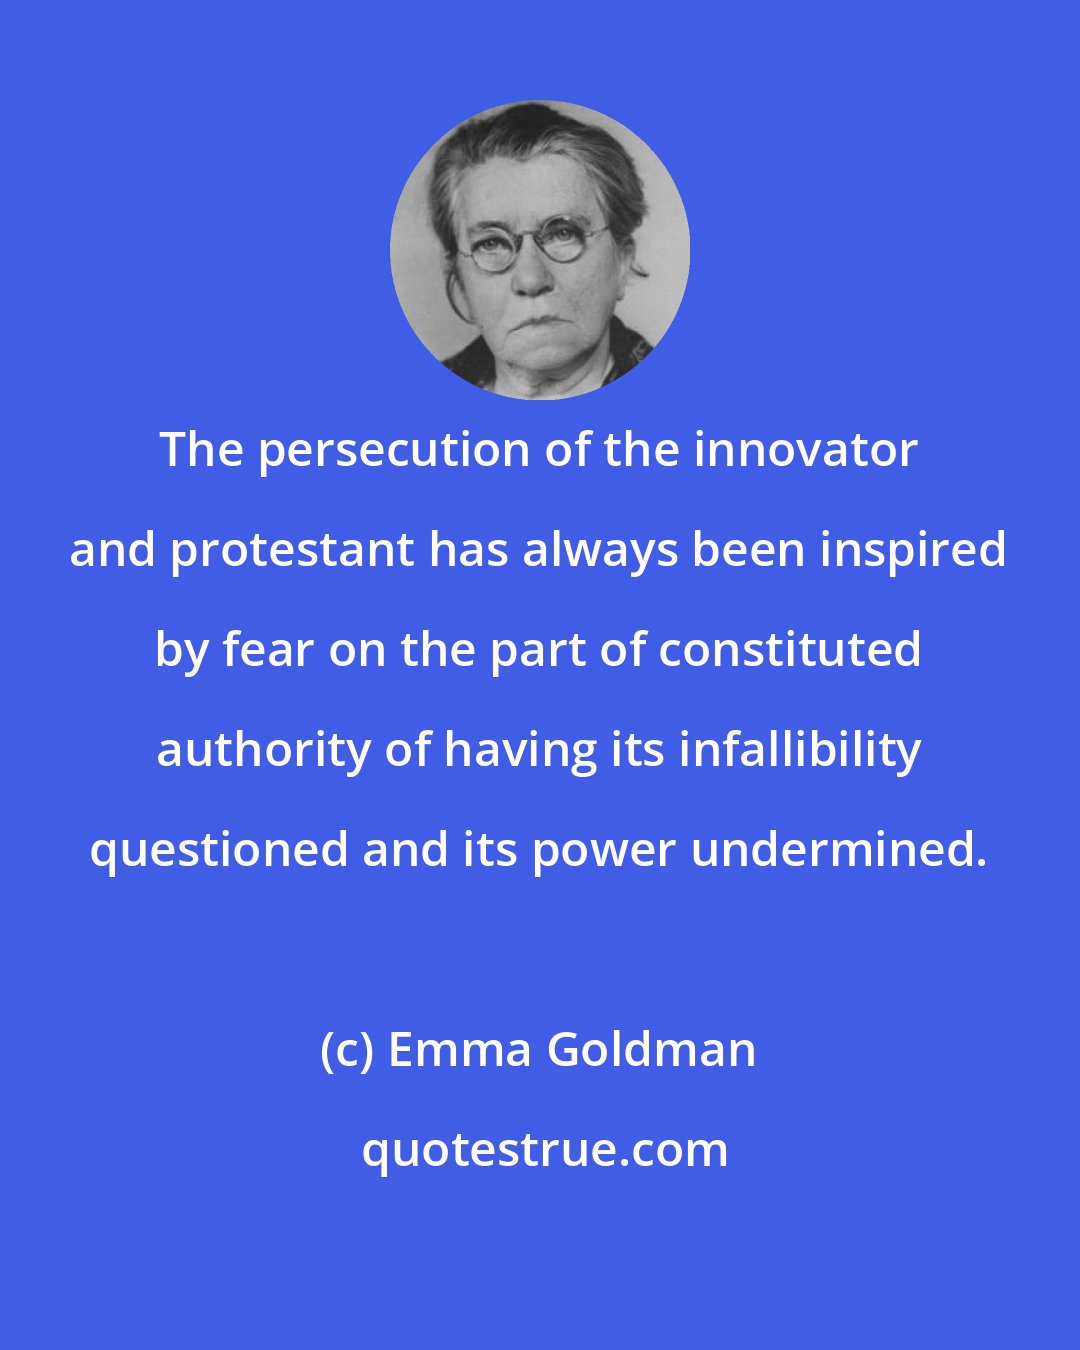 Emma Goldman: The persecution of the innovator and protestant has always been inspired by fear on the part of constituted authority of having its infallibility questioned and its power undermined.